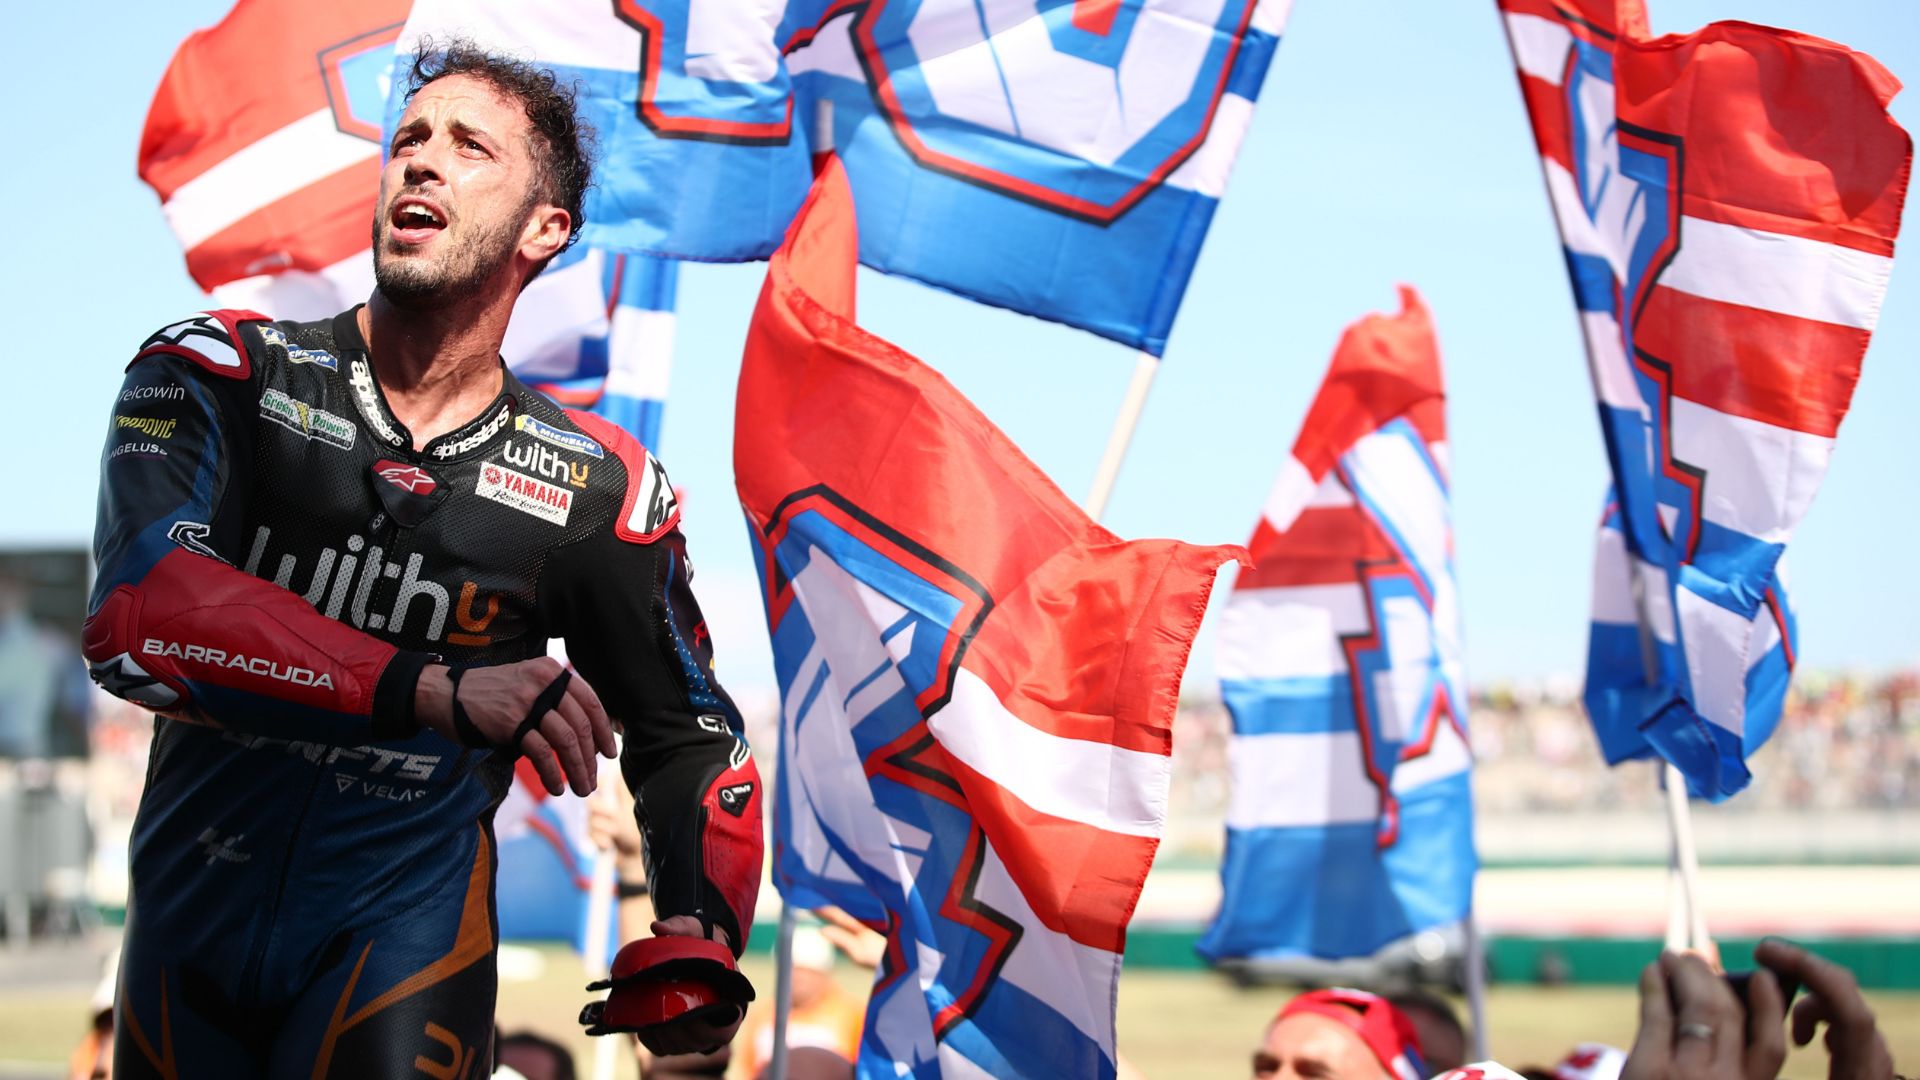 MotoGP, Andrea Dovizioso says goodbye to everyone: The Motor Valley rider is retiring.